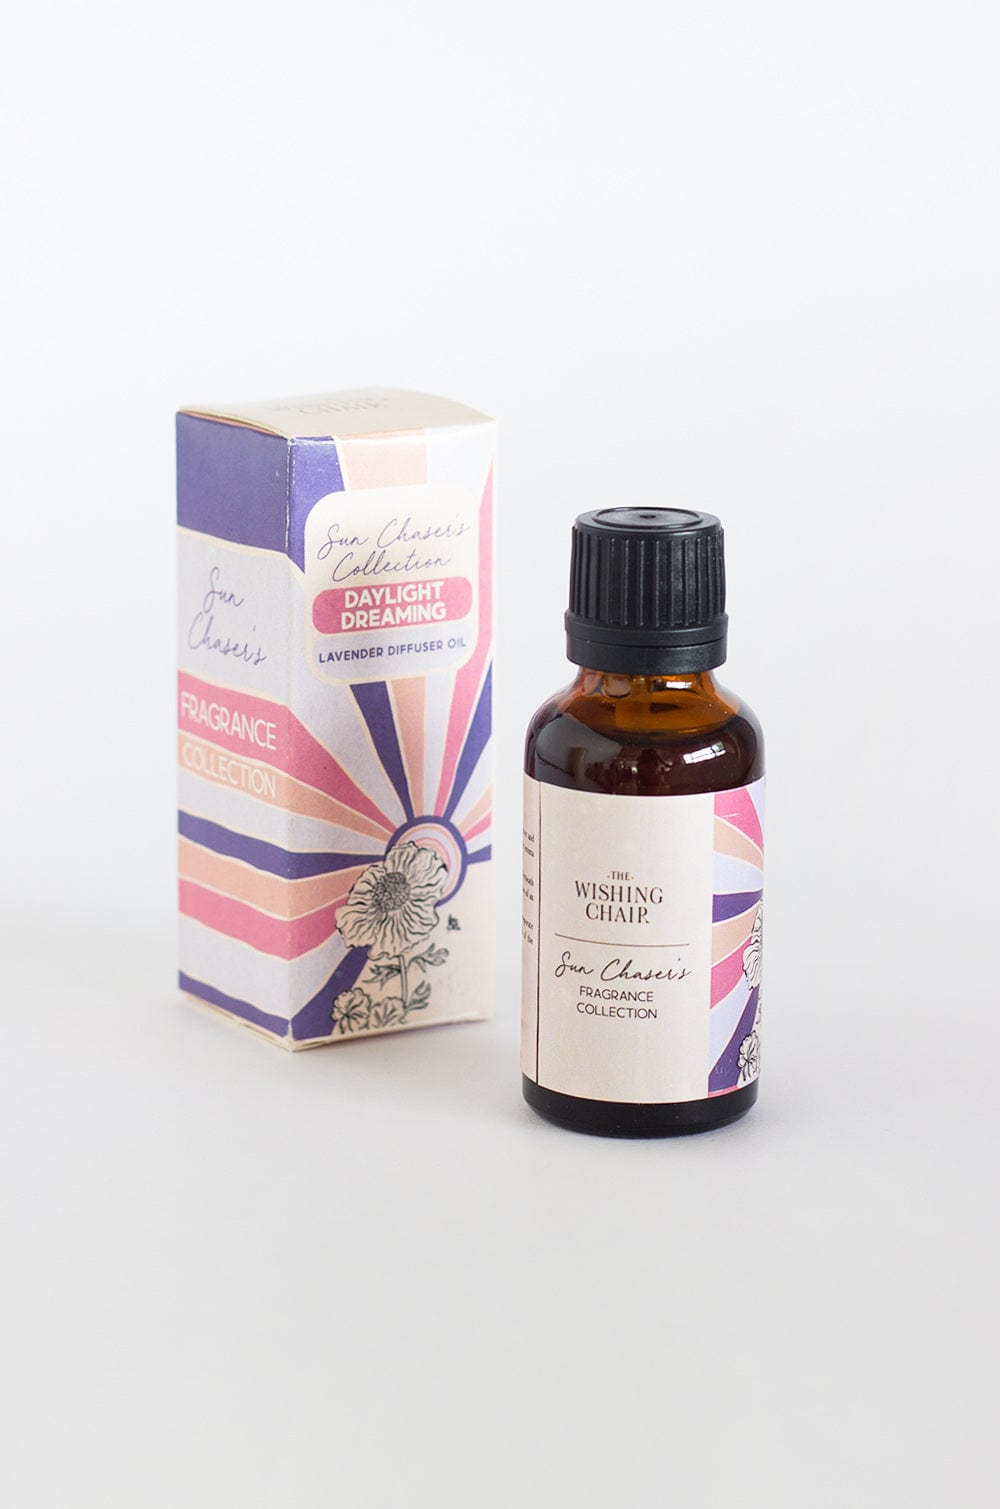 Lavender Diffuser Oil - Sun Chaser's Fragrance Collection